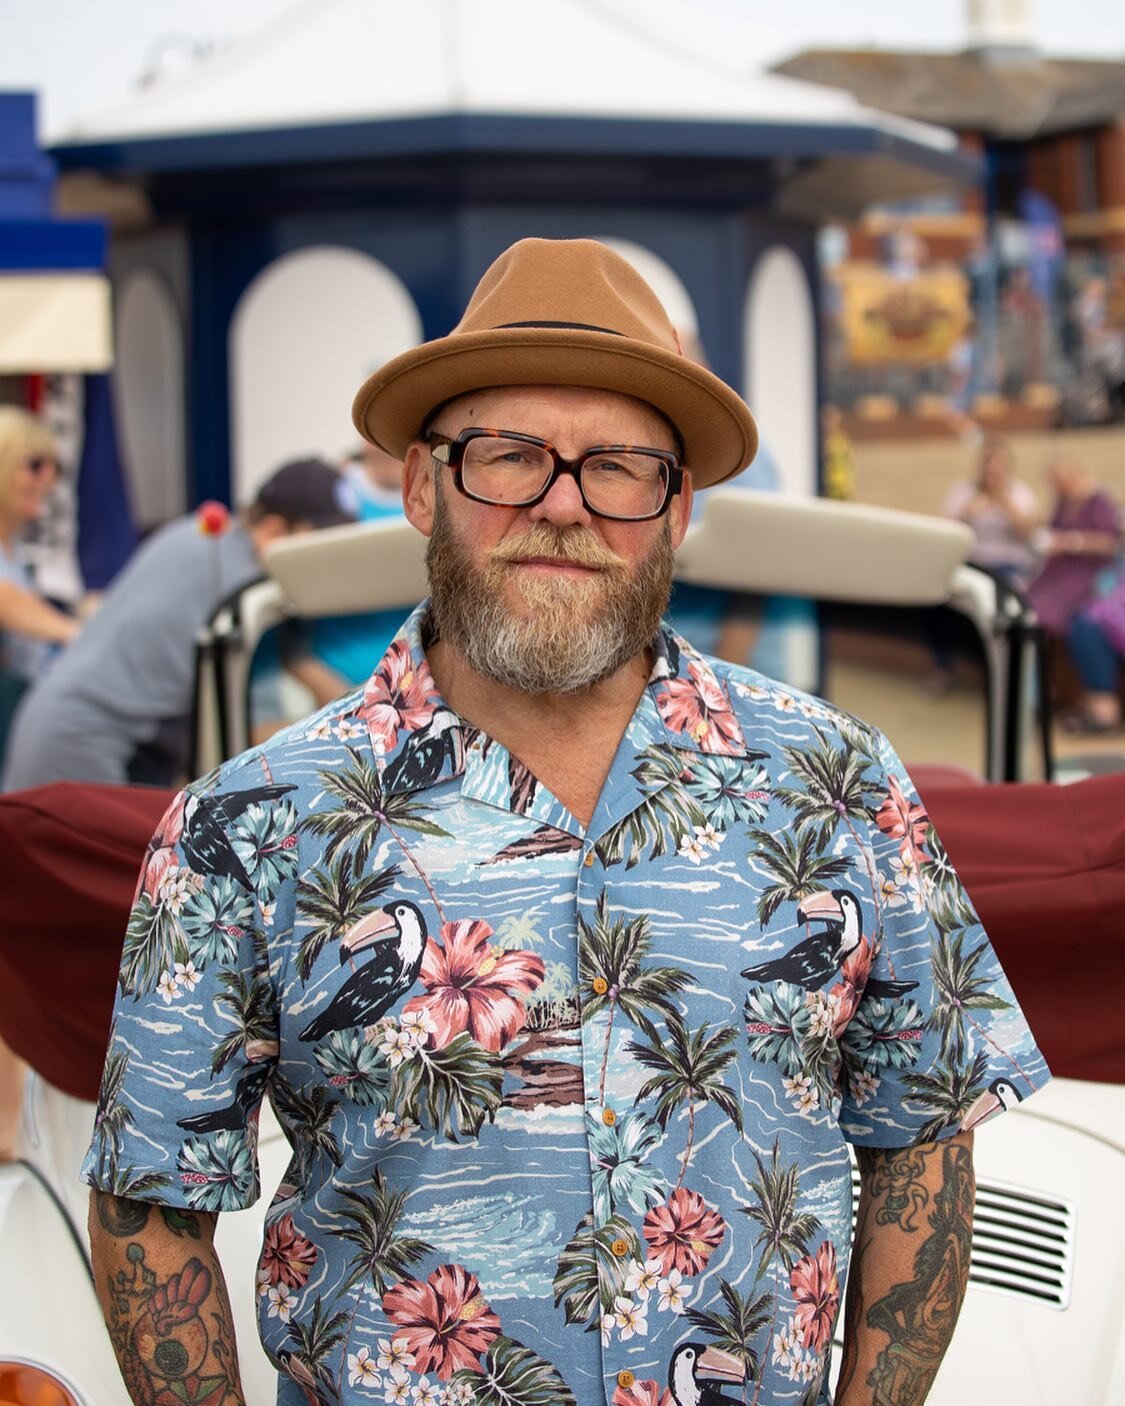 Portrait taken at last years Summer Barryfornia event at Barry Island.
If anyone knows his Instagram let me know so I can tag. Really looking forward to attending this years event in a couple of weeks.
.
.
Canon R6
RF 50mm f1.8 STM

#barryfornia #por